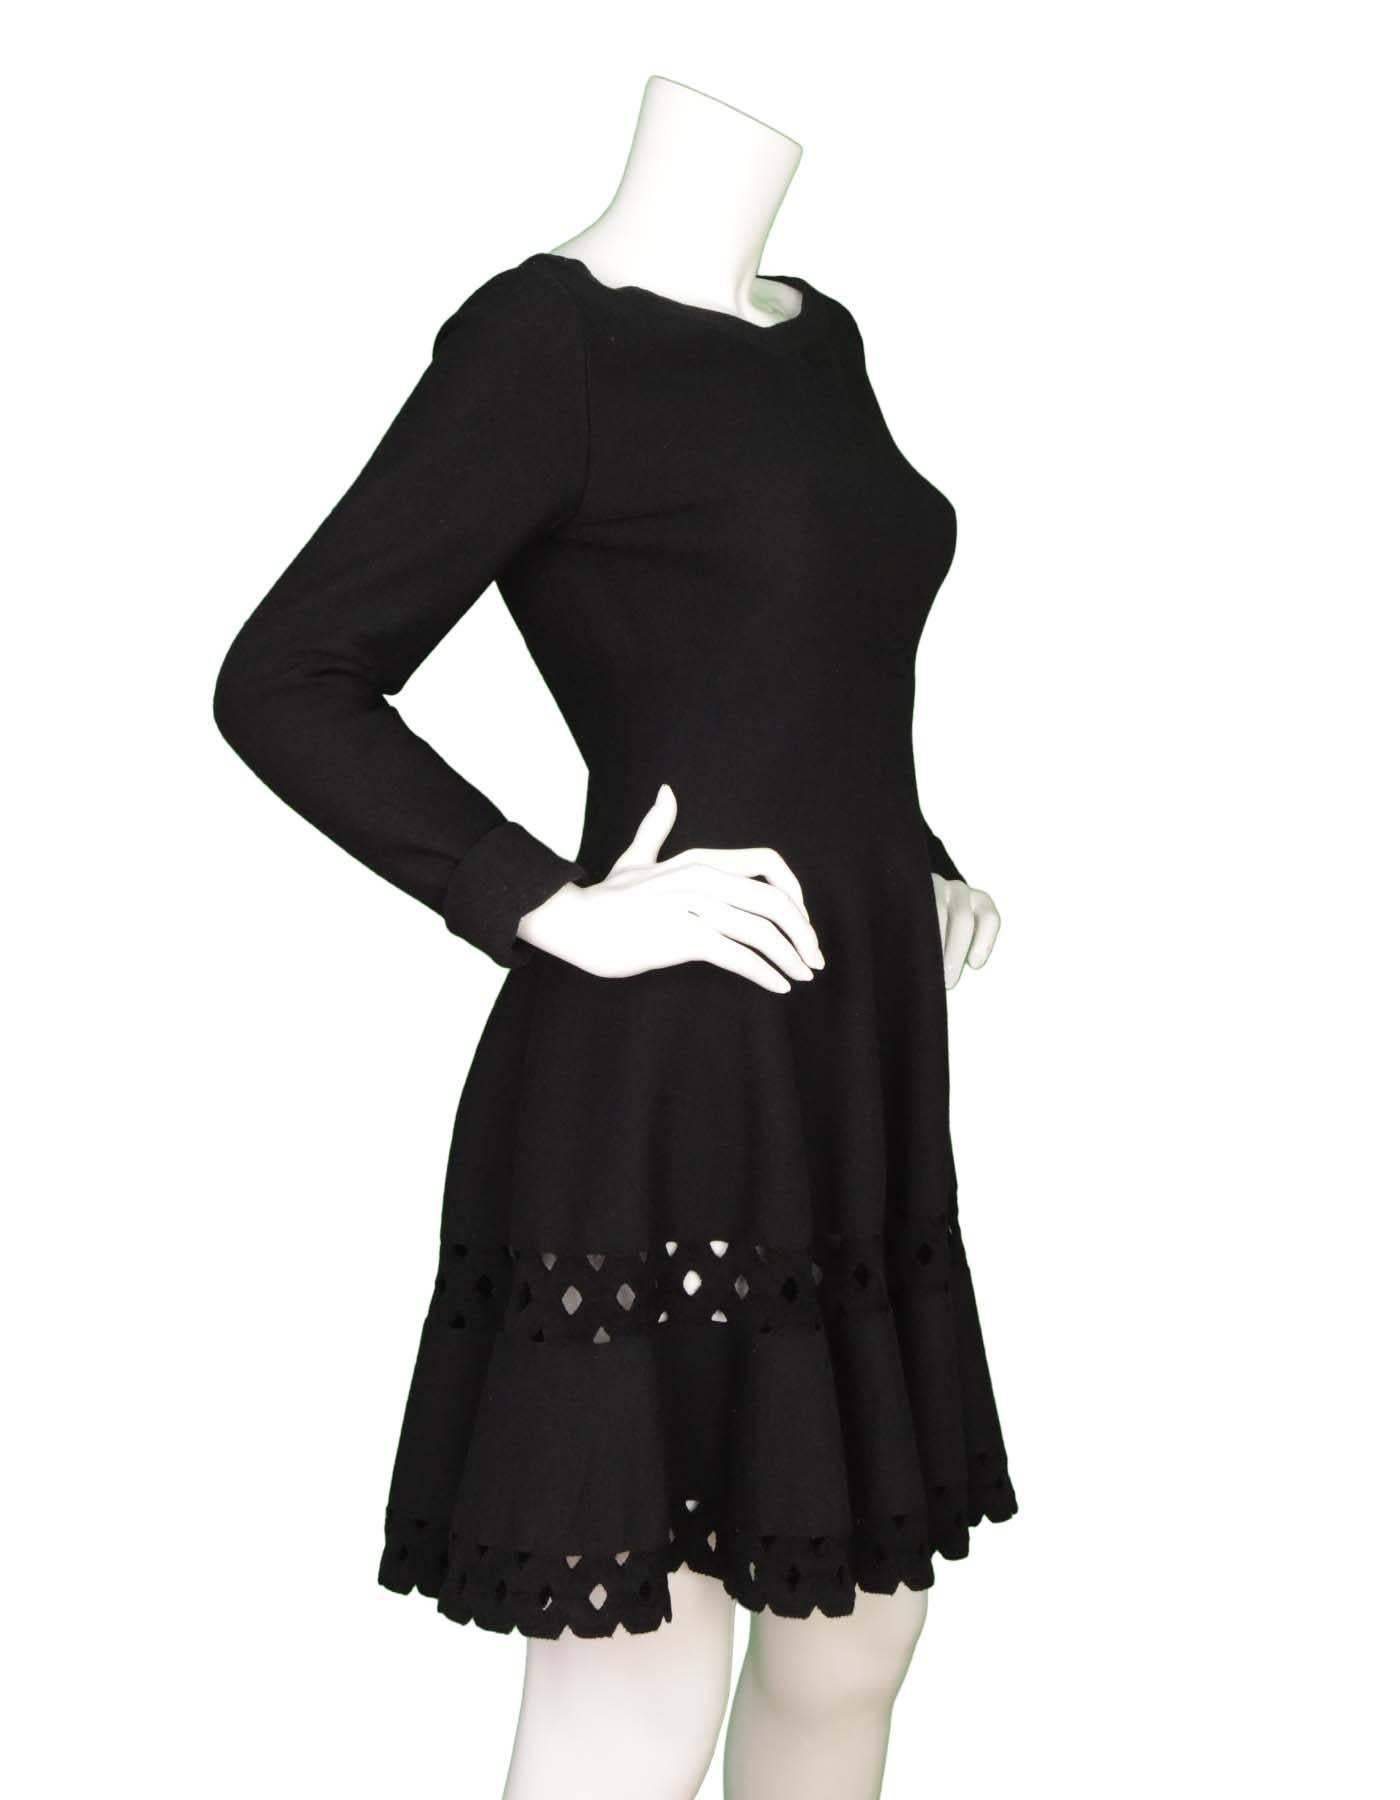 Alaia Black Wool Cut Out Long Sleeve Dress sz 42
Features cut out detailing at bottom sweep
Made In: Italy
Color: Black 
Composition: 60% Wool , 20% viscose, 10% nylon, 10% polyester
Lining: None
Closure/Opening: Center back zip